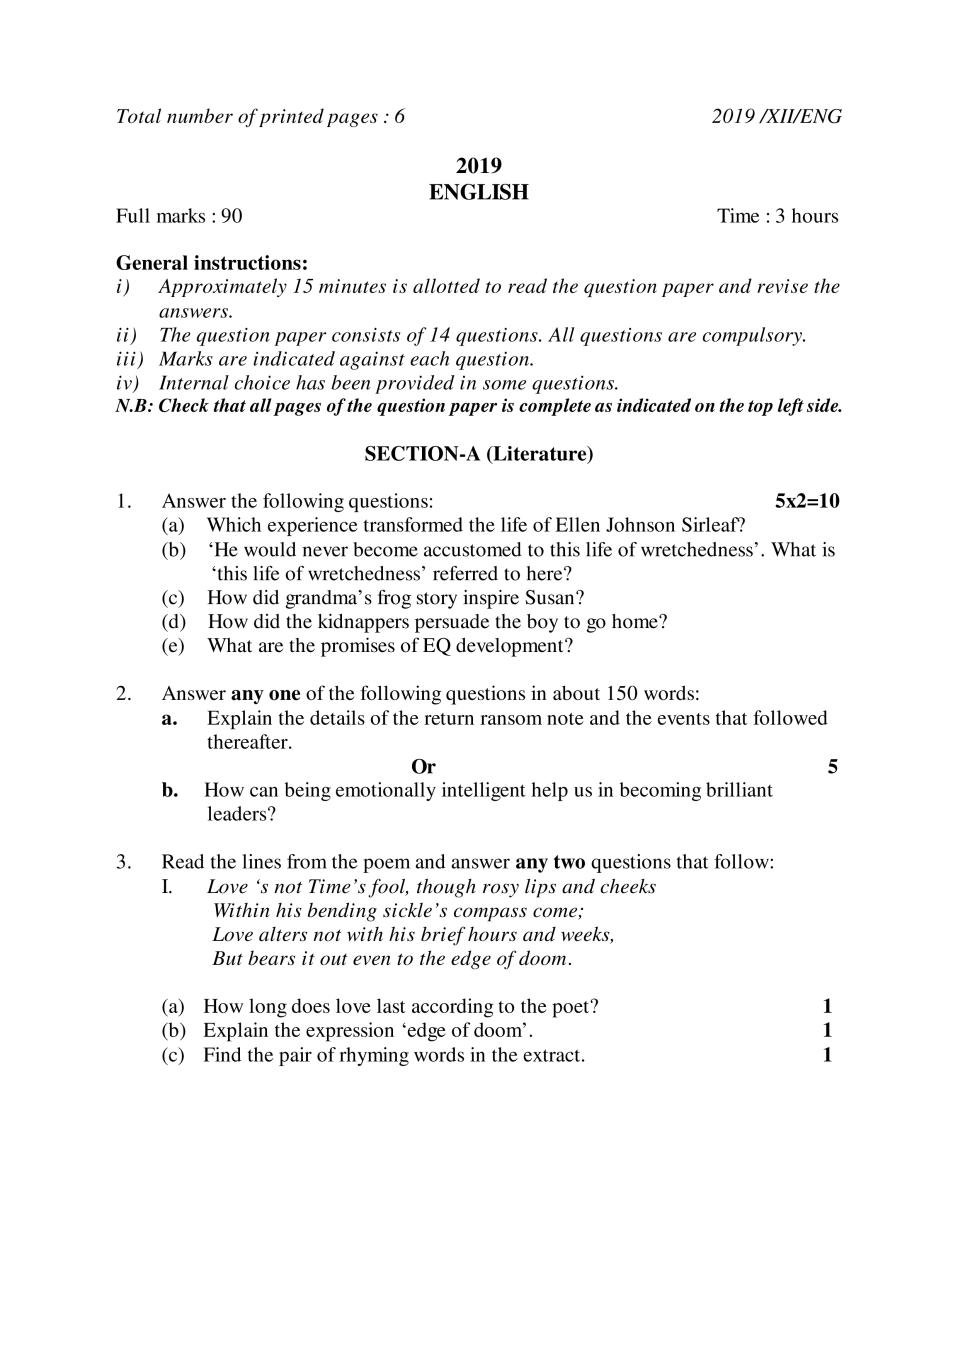 NBSE Class 12 Question Paper 2019 for English - Page 1